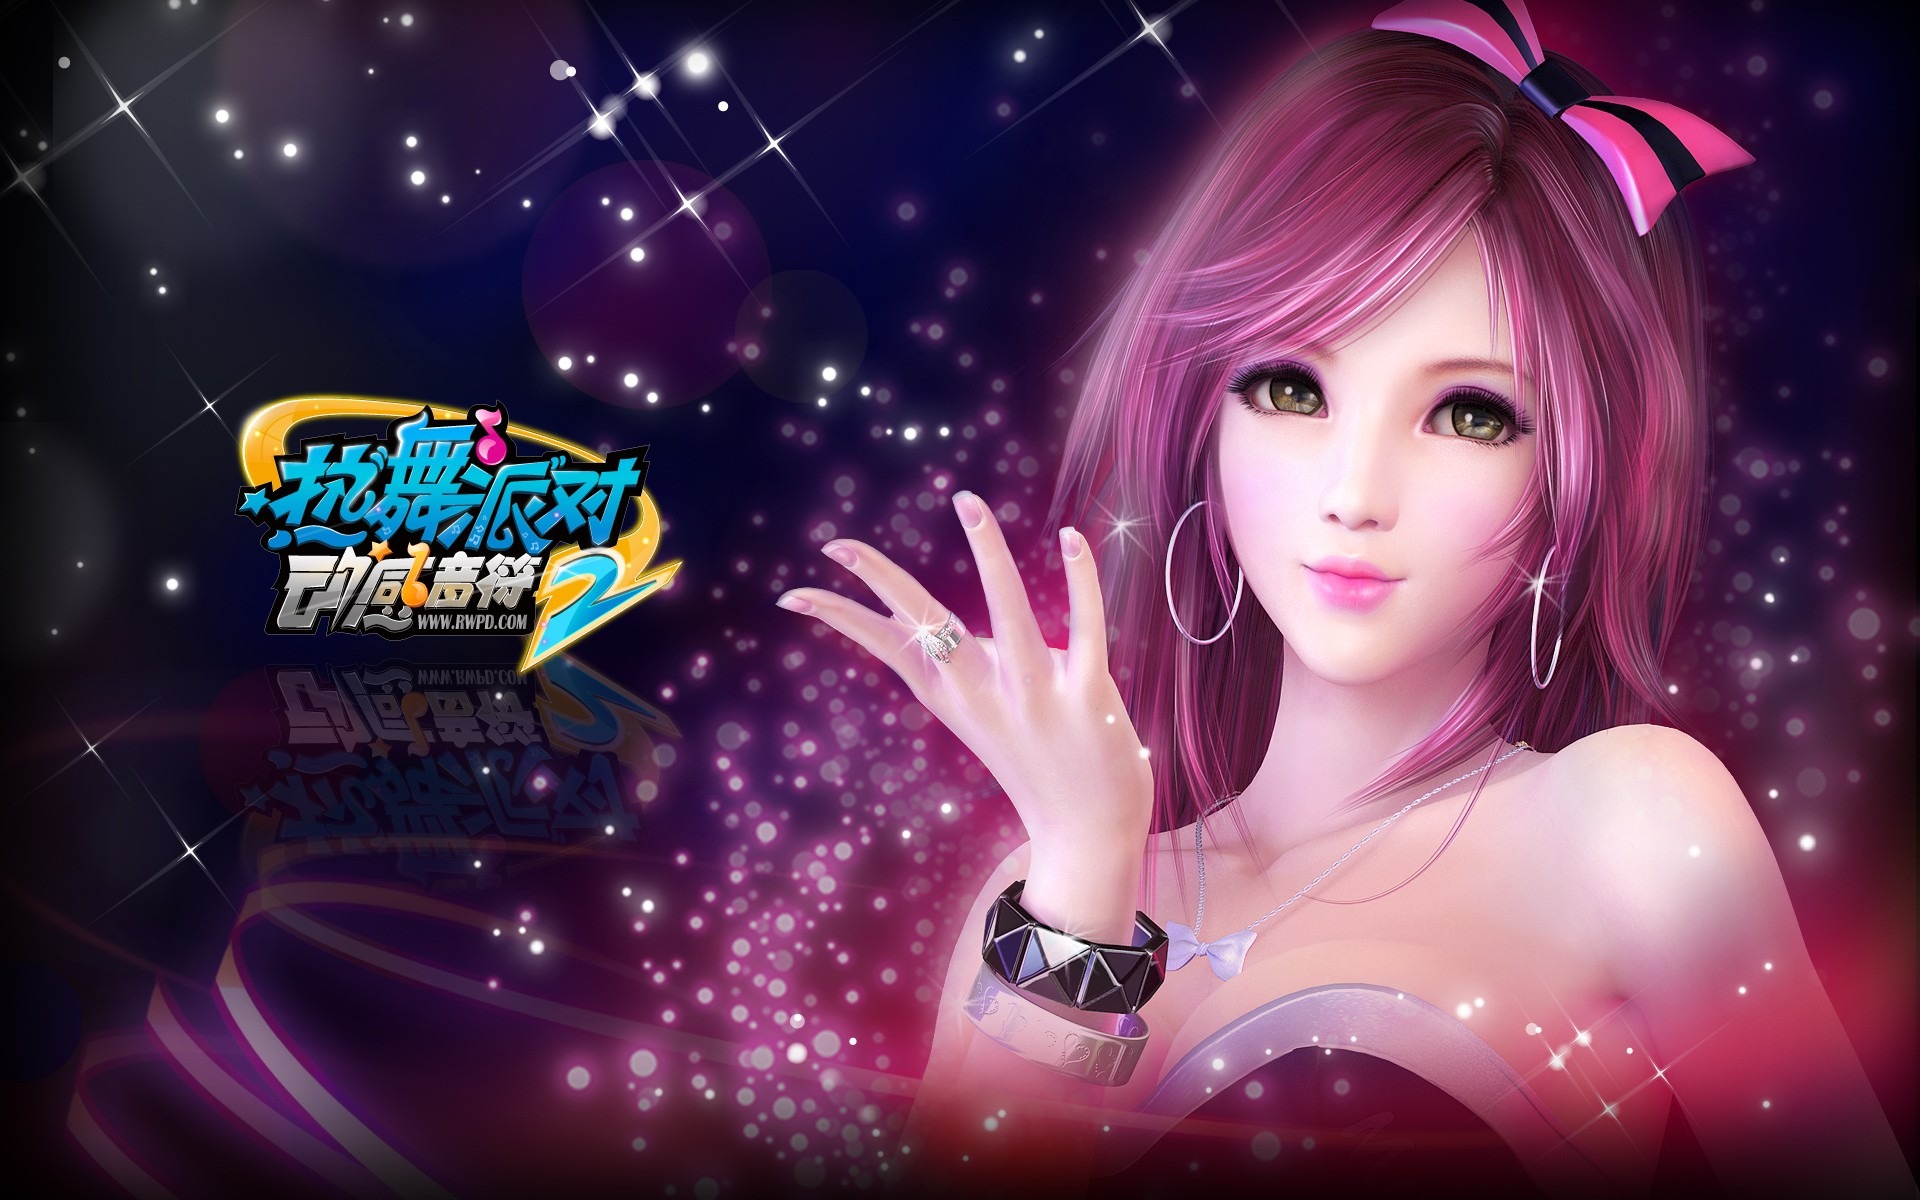 Online game Hot Dance Party II official wallpapers #26 - 1920x1200